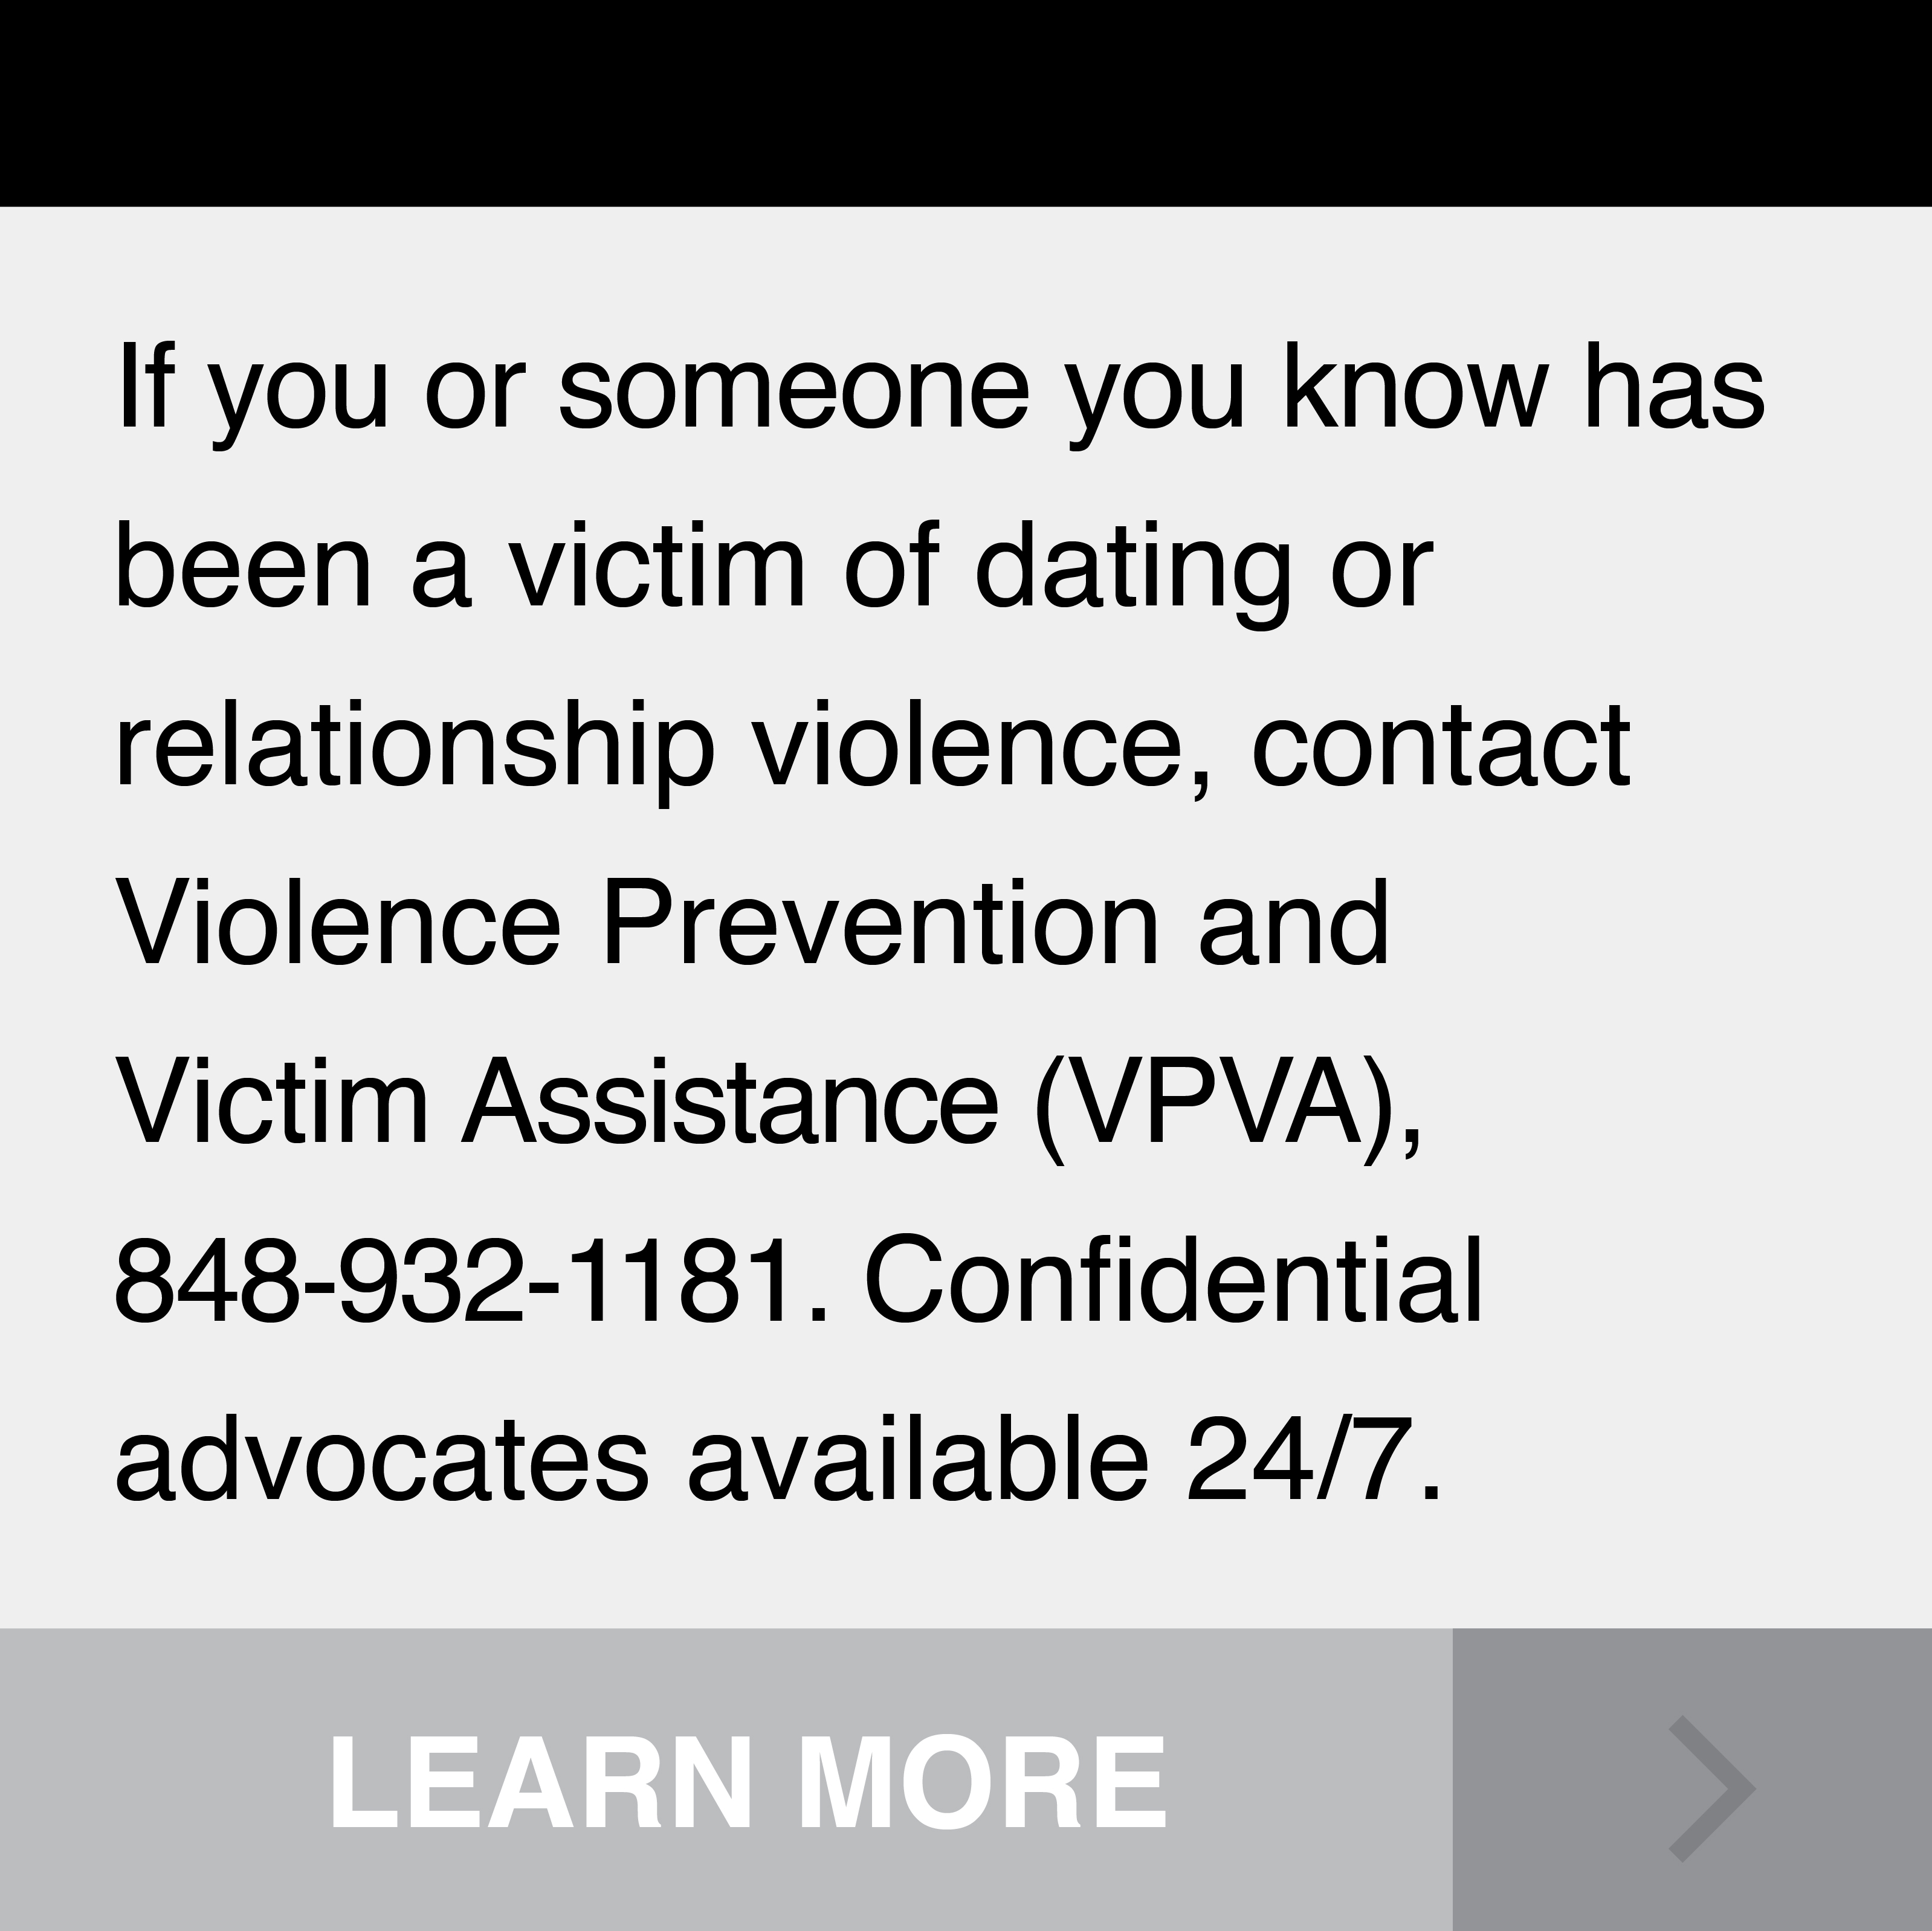 If you or someone you know has been a victim of dating or relationship violence, contact Violence Prevention and Vicitim Assistance (VPVA), 848-932-1181. Confidential advocates available 24/7.